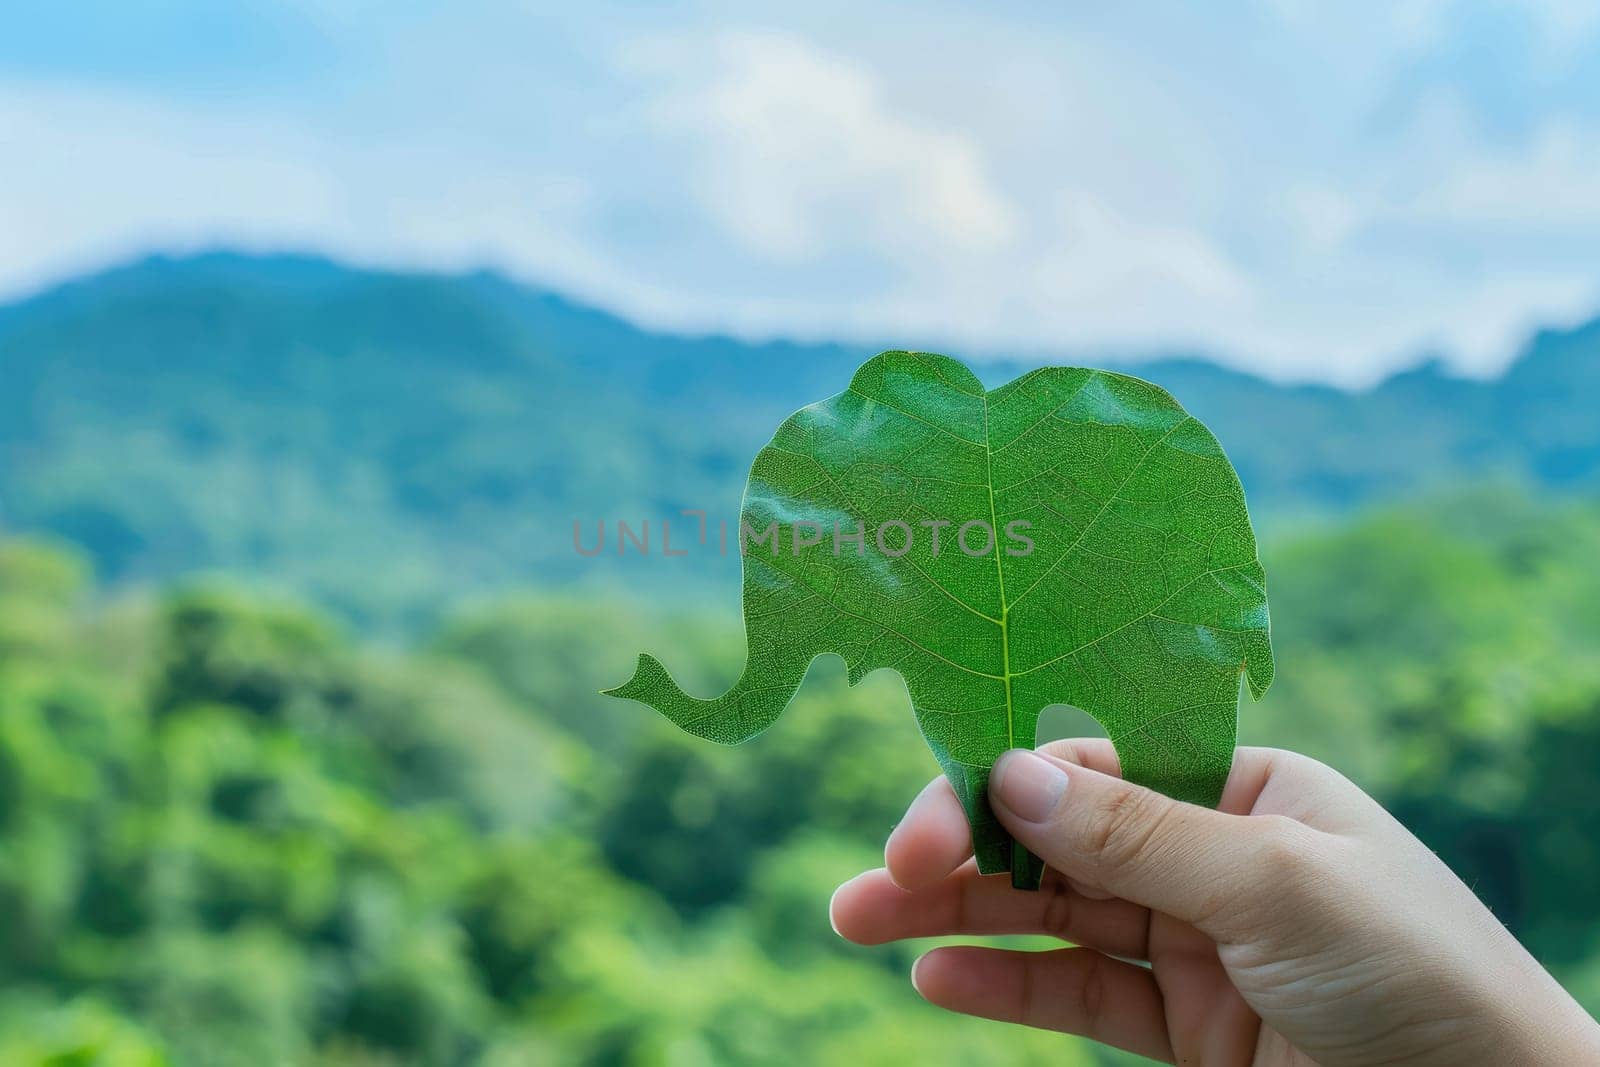 nature art of leaf carved into animal shape showing concept of sustainability and environmental conservation. aigx04